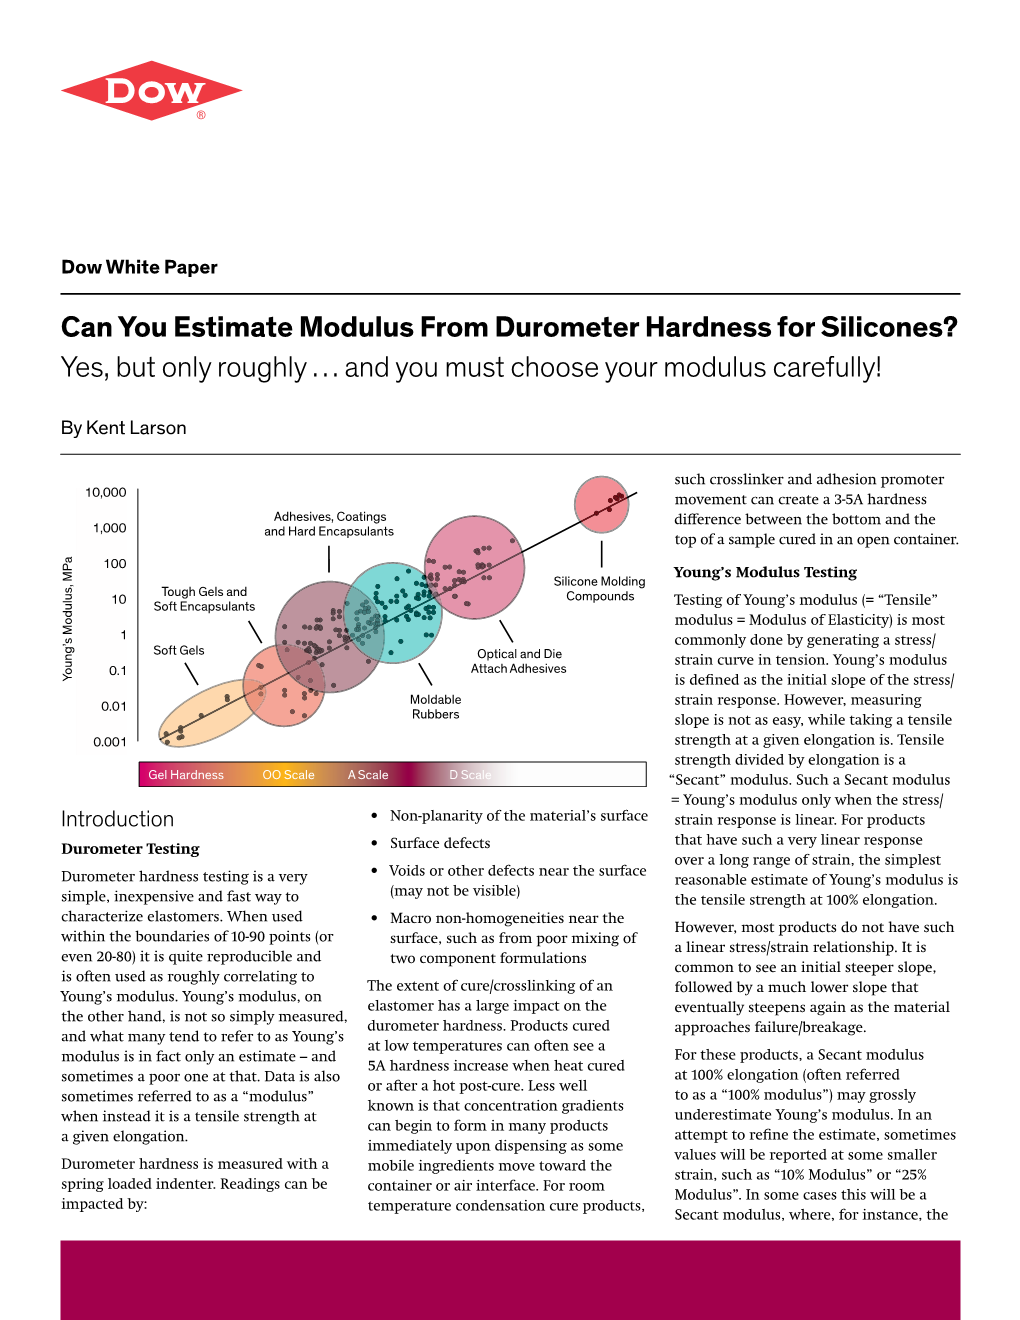 Can You Estimate Modulus from Durometer Hardness for Silicones? Yes, but Only Roughly … and You Must Choose Your Modulus Carefully!